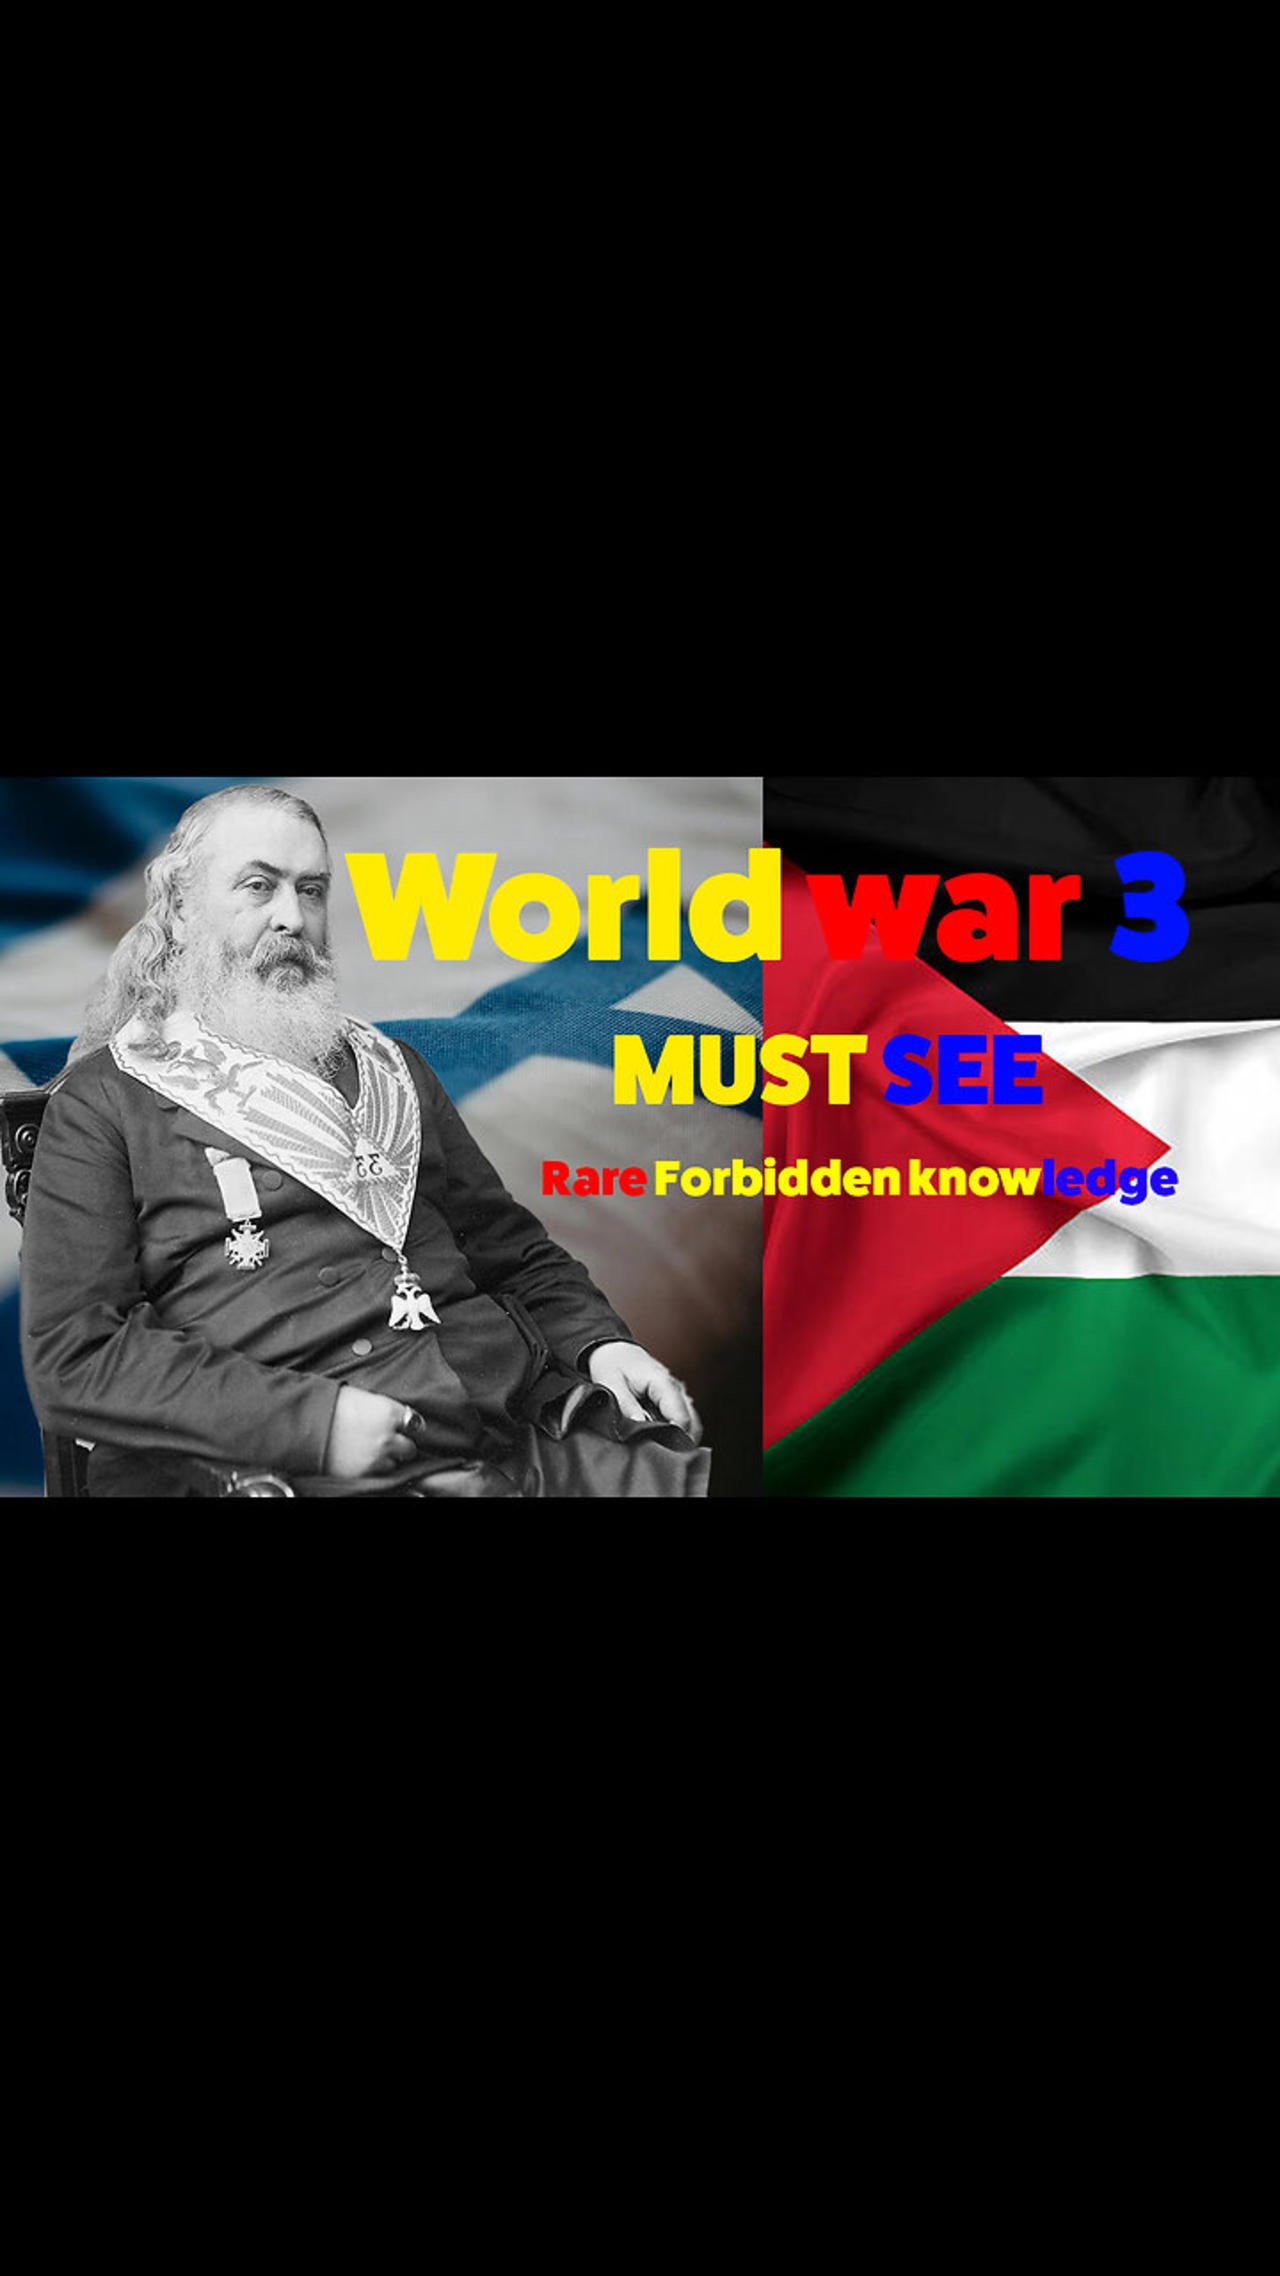 WORLD WAR 3 COMING!!! MUST WATCH FORETOLD IN MANY BOOKS!